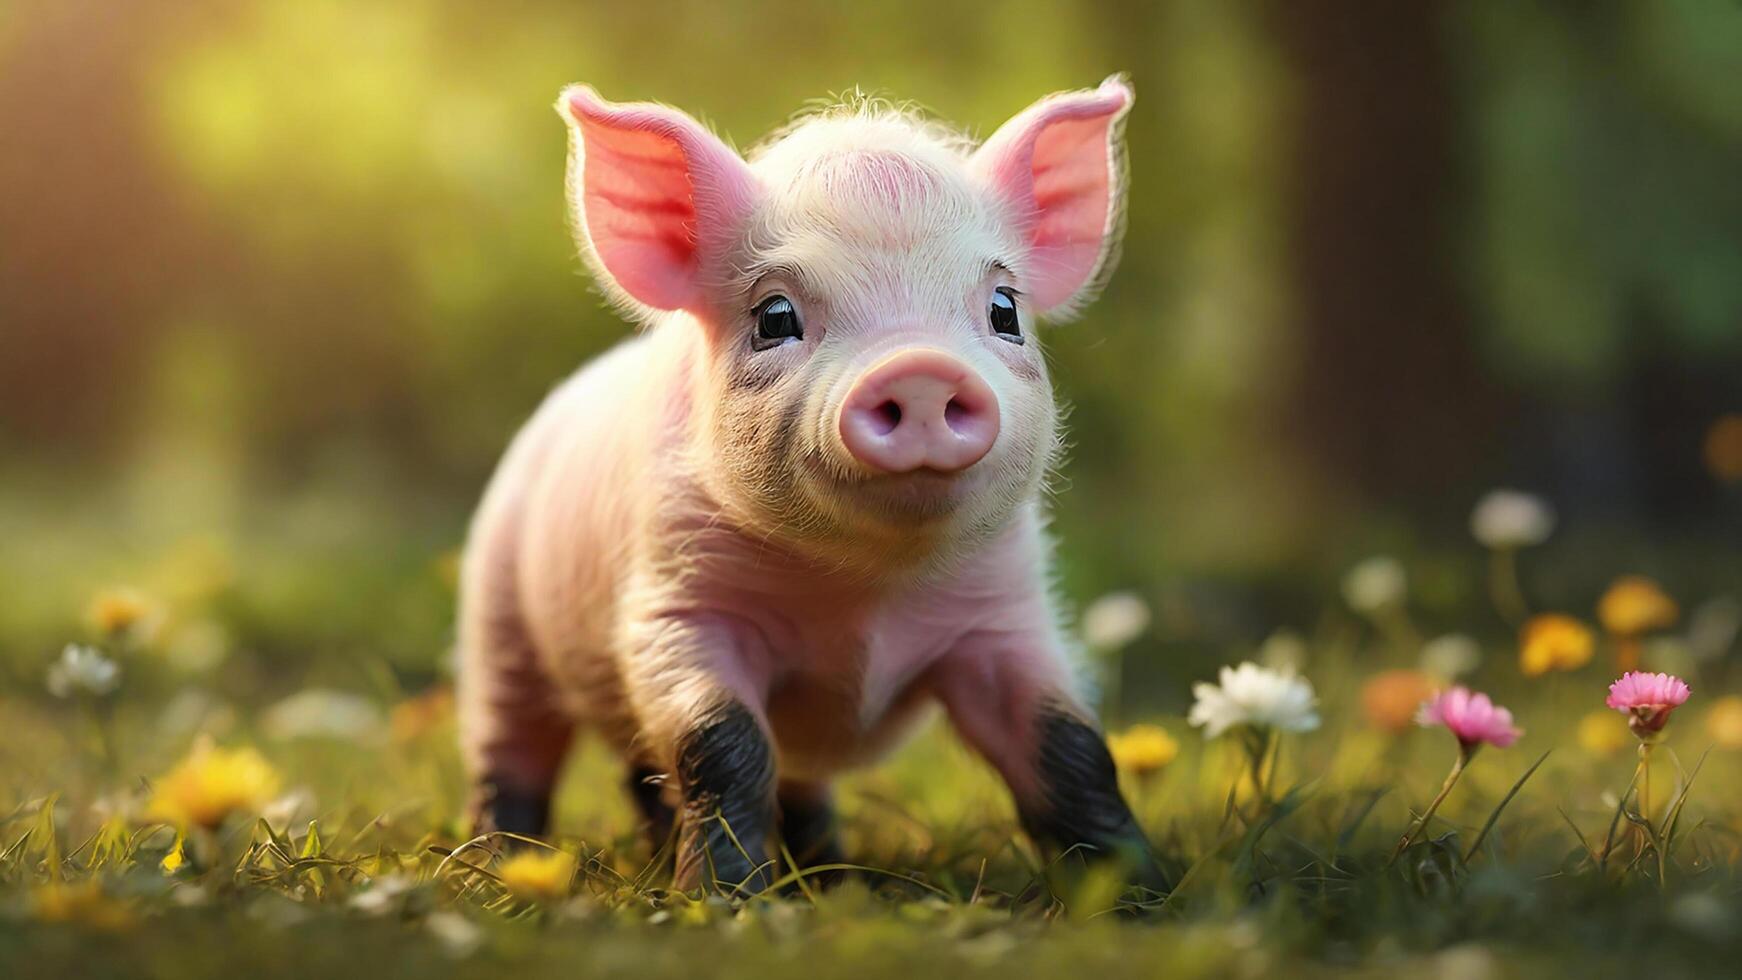 AI generated Photorealistic Image of Adorable baby pig photo